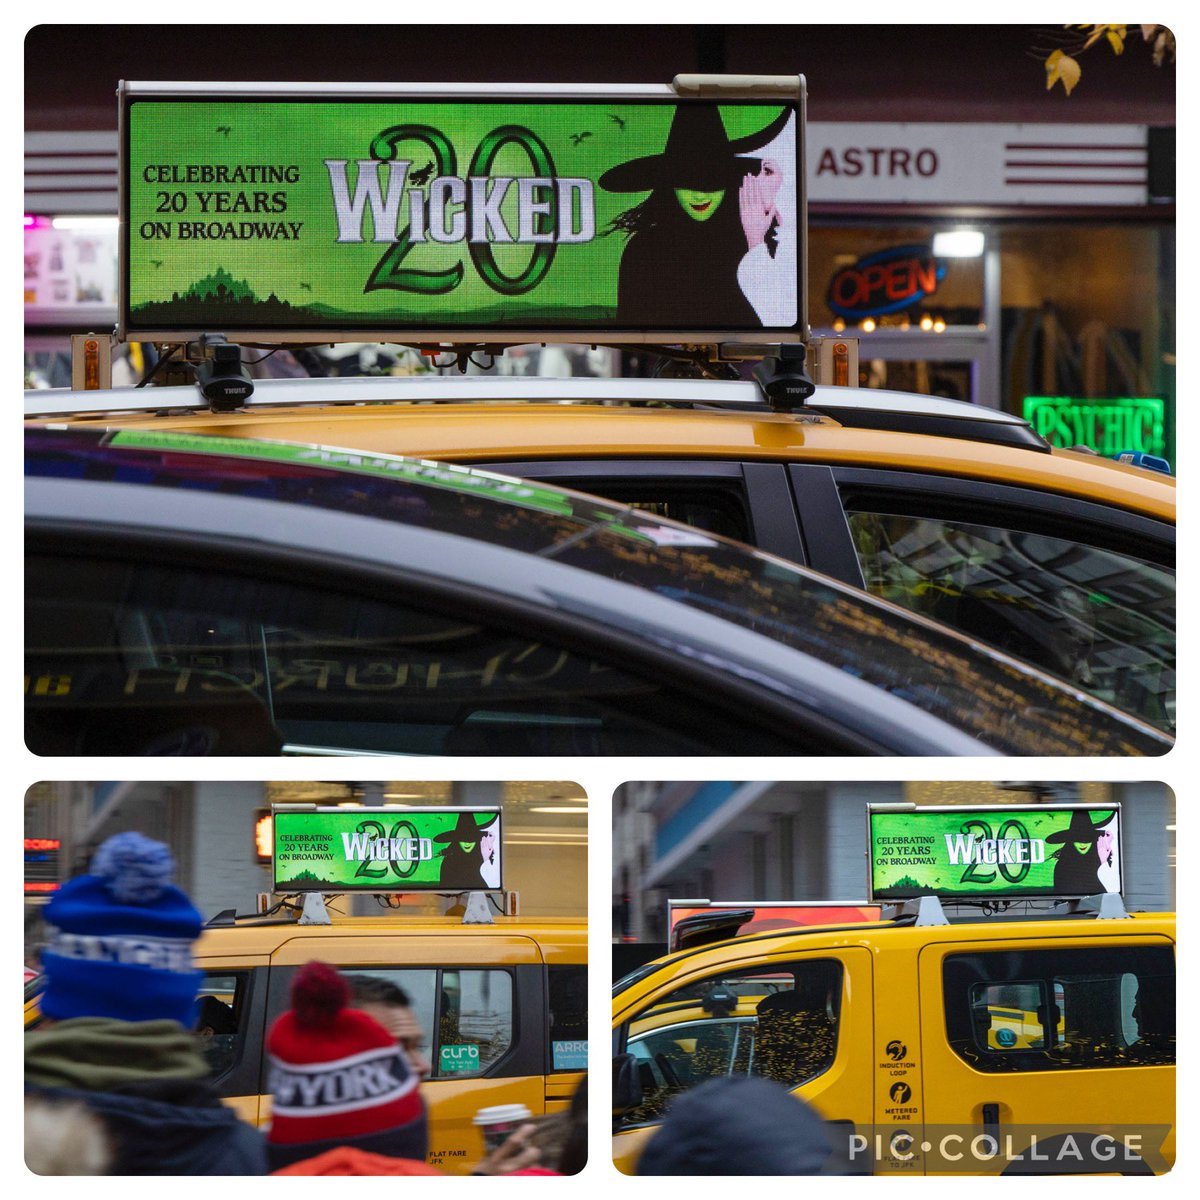 Our gem of a taxi campaign puts a spell on the NYC streets as we celebrate 20 years of @WICKED_Musical * 💚 🙌 💚 🥂 💚 * #wicked #broadway #20years #20anniversary #20th